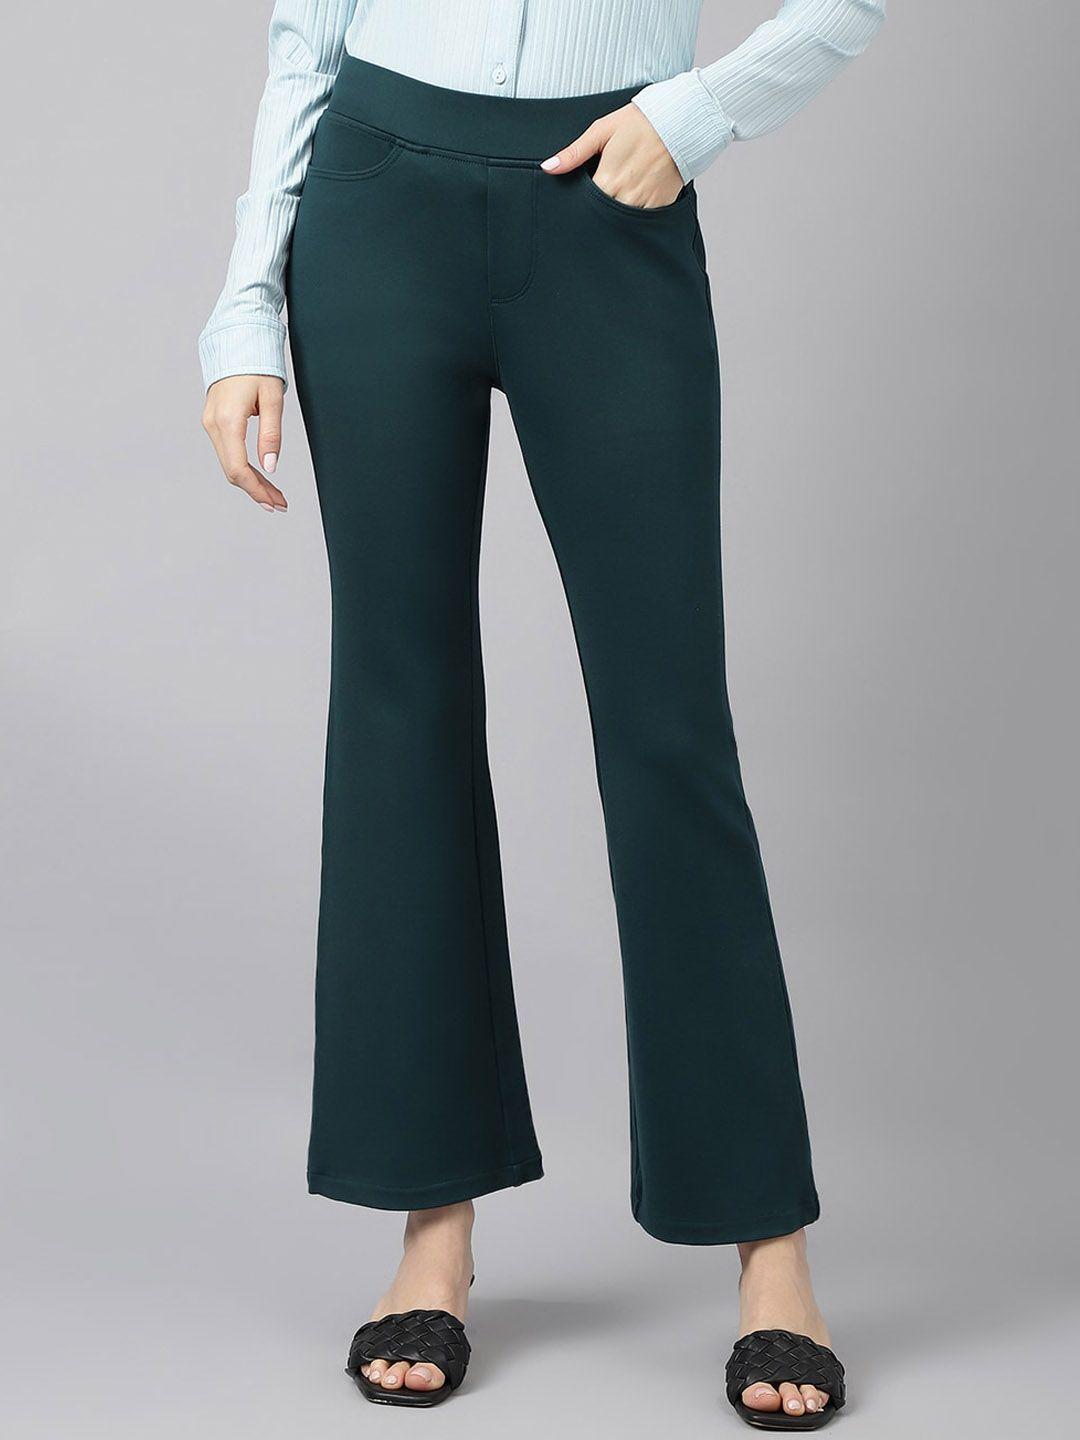 xpose-women-comfort-flared-high-rise-bootcut-trousers